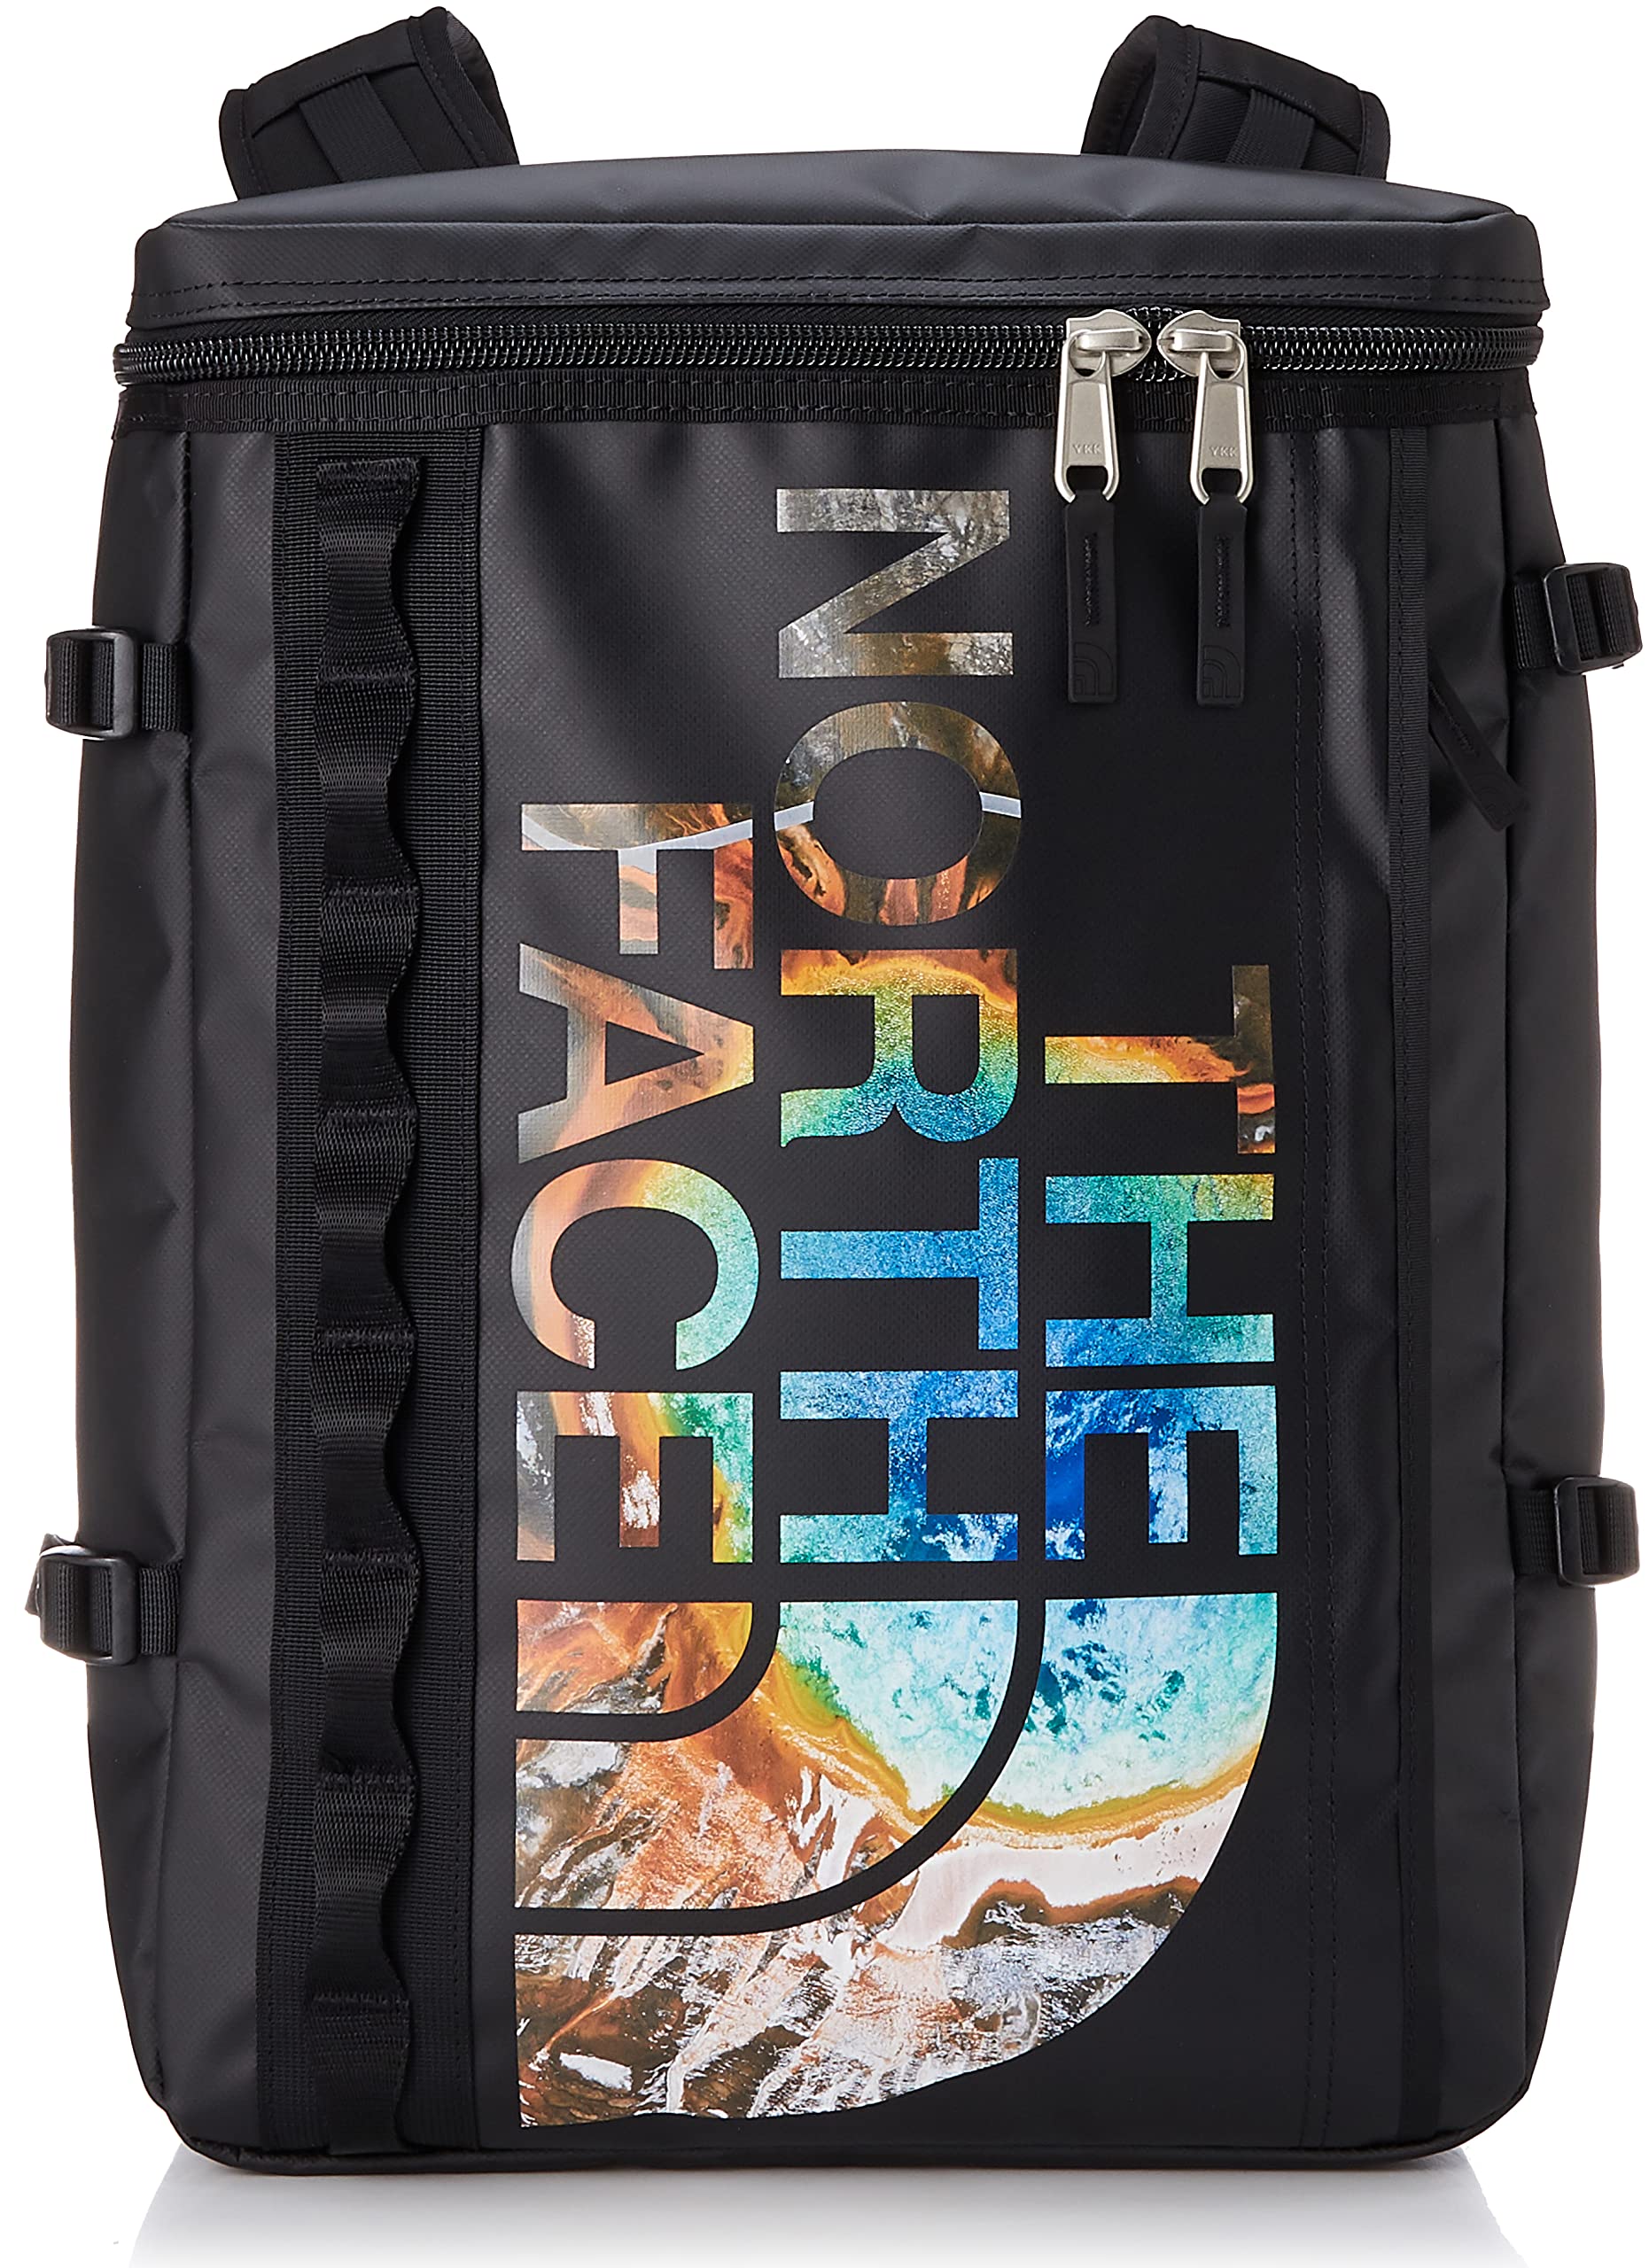 THE NORTH FACE NM82250 Novelty BC Fuse Box, Yellowstone Print, ONESIZE